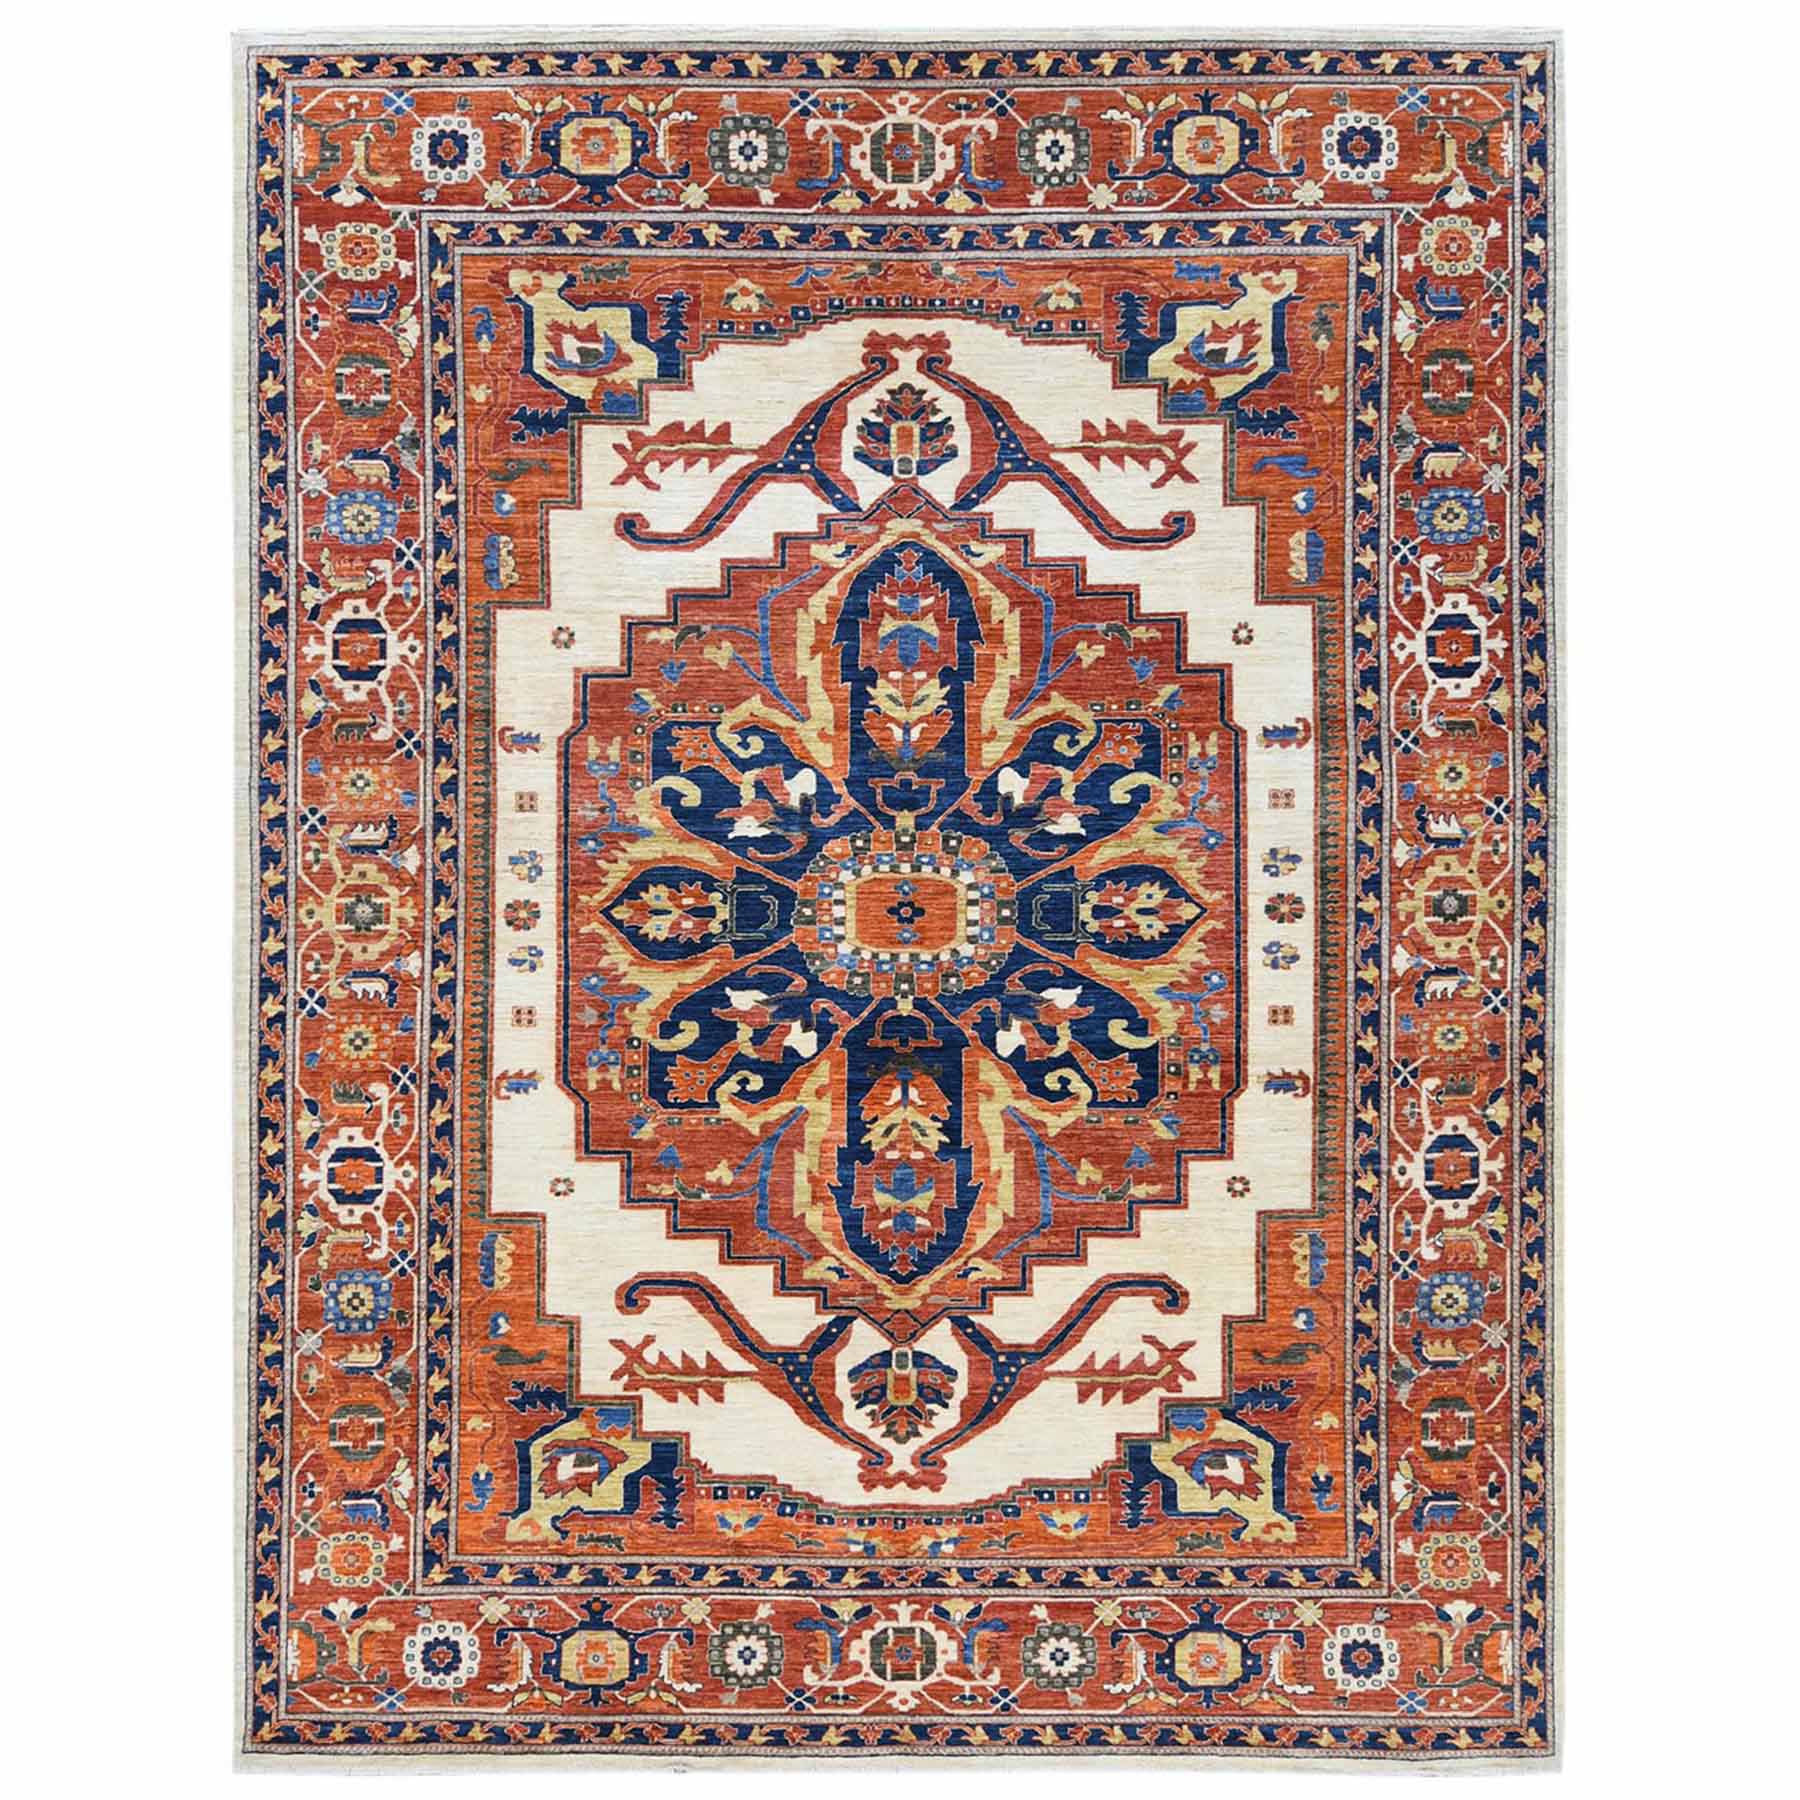 2' x 3' Handmade Persian Design made out of natural wool natural dyes throw rug